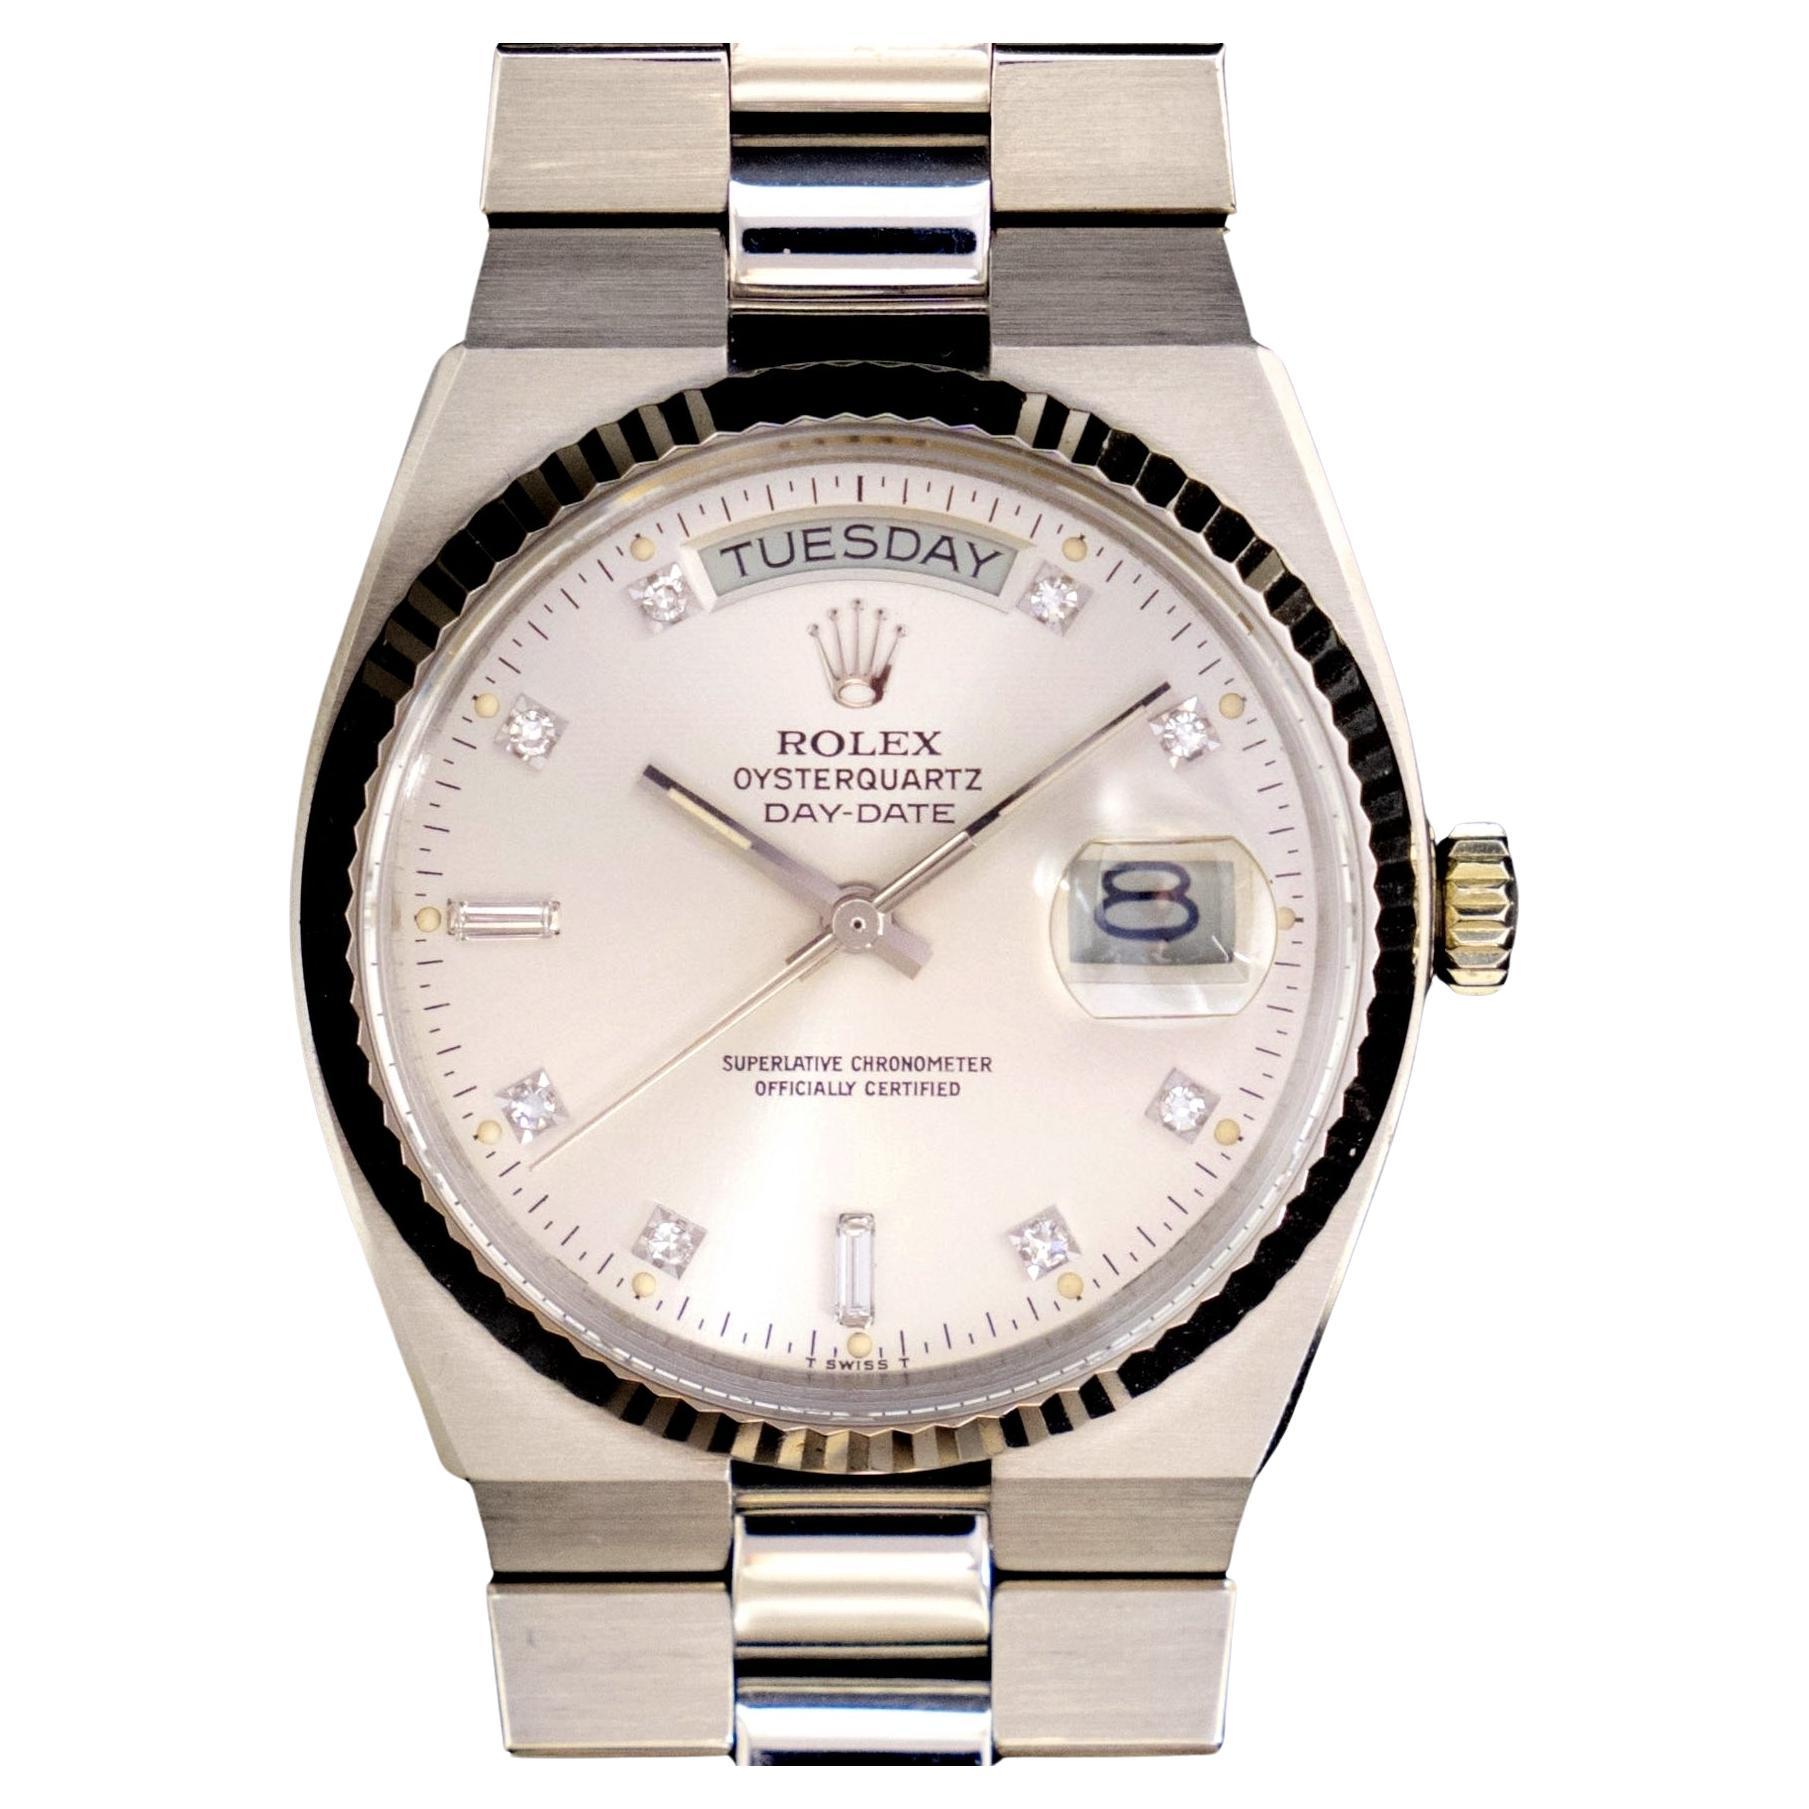 Rolex Oysterquartz Day-Date 18K White Gold Silver Diamond Dial Watch 19019, 1979 For Sale